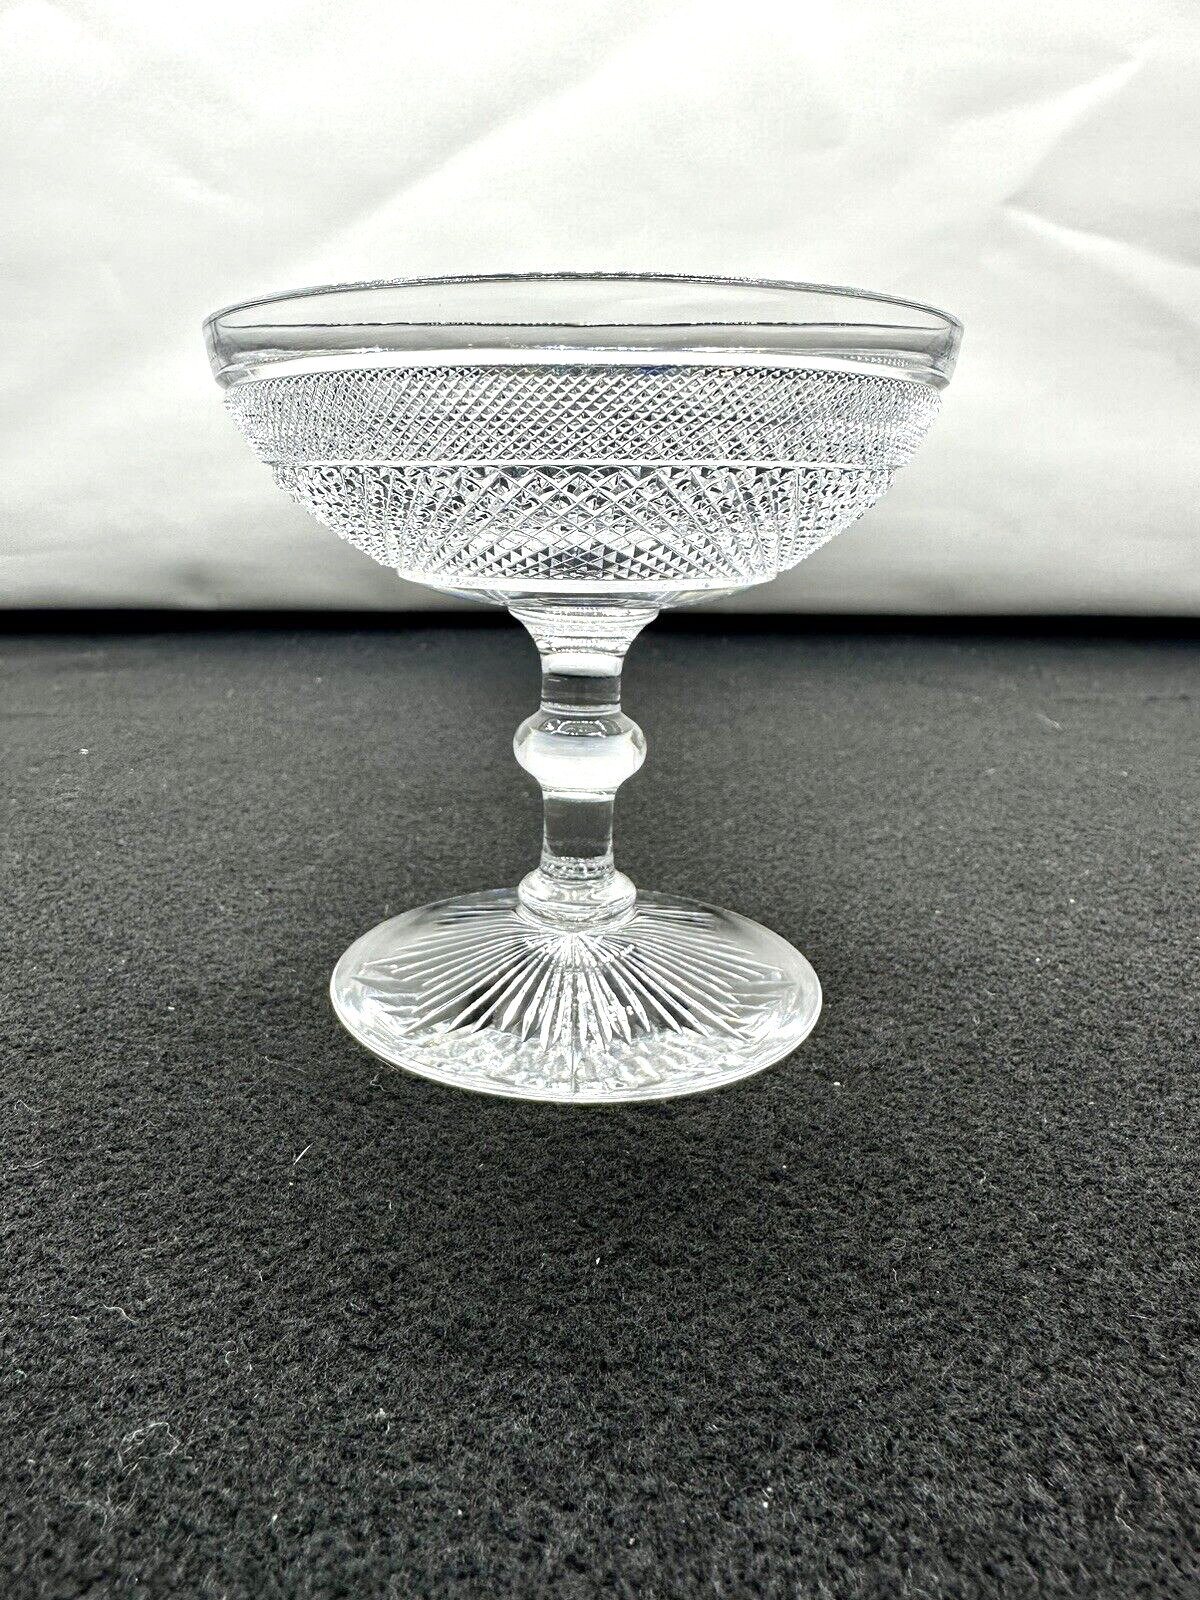 1 Steuben Crystal Champagne Coupe #6268 Queen Anne Pattern